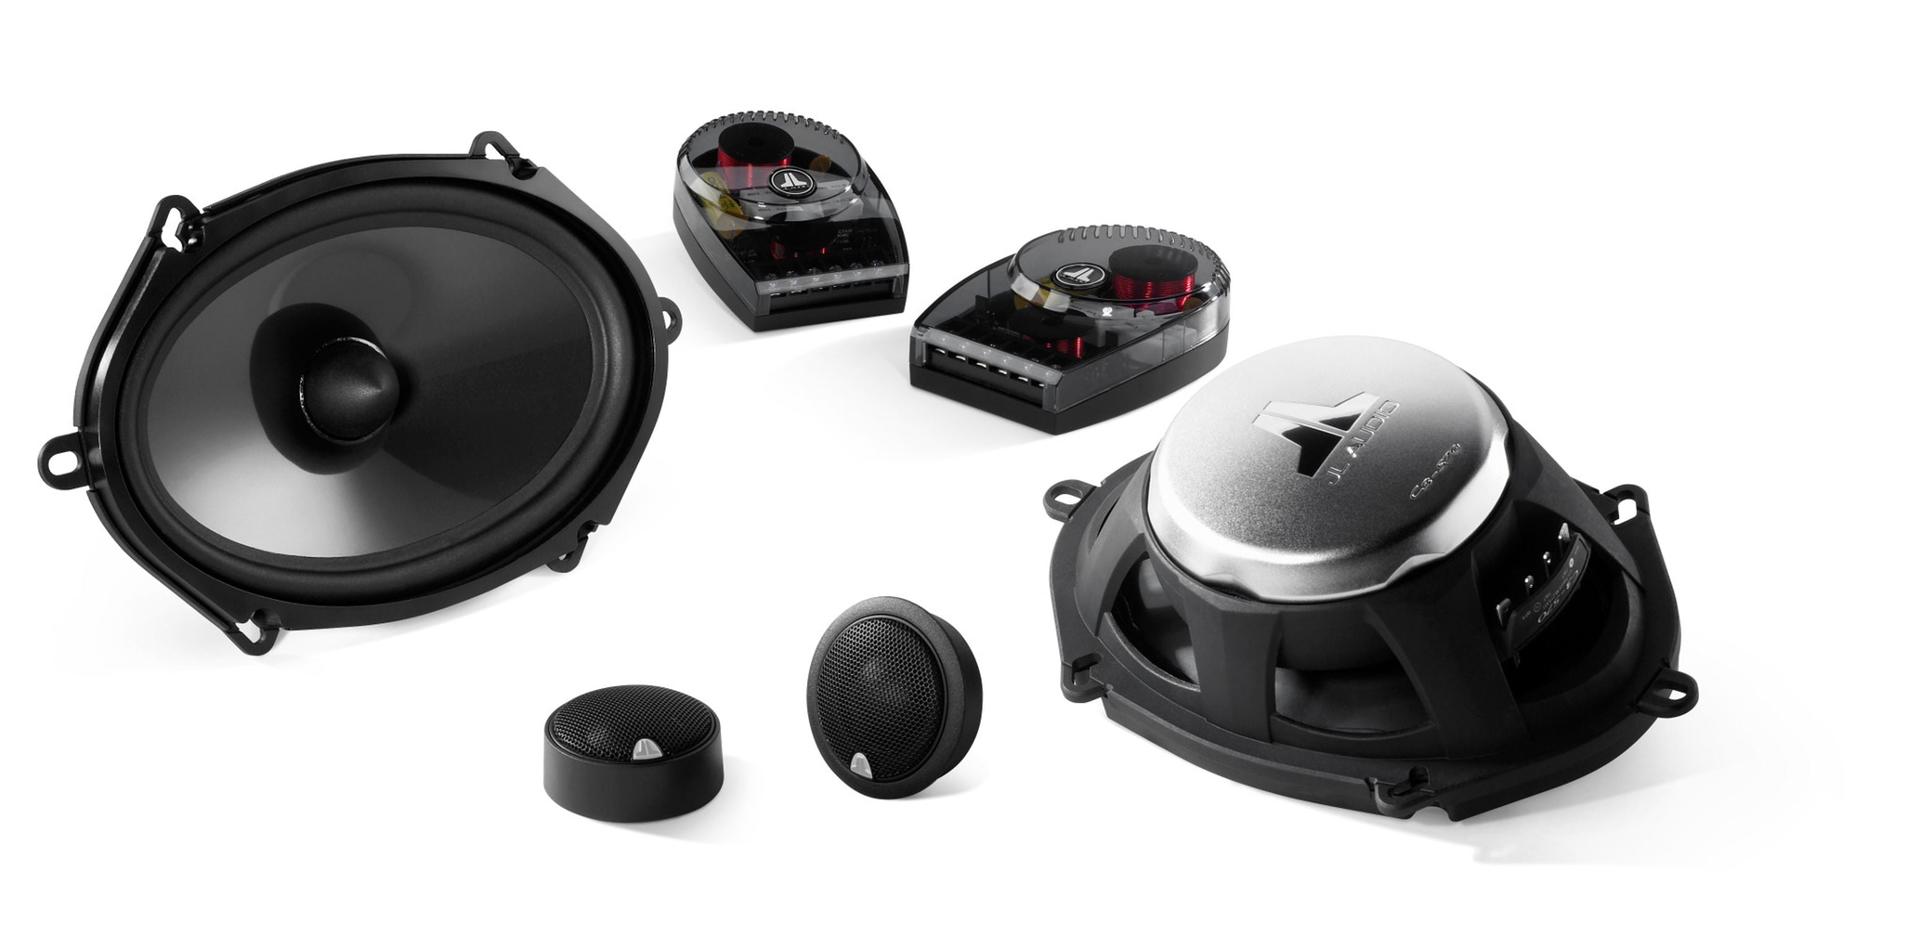 JL Audio C3-570 Convertible System with 5 x 7 / 6 x 8-inch (125 x 180mm) woofer and 1-inch (25mm) silk dome tweeter with neodymium magnet, programmable outboard crossover network.